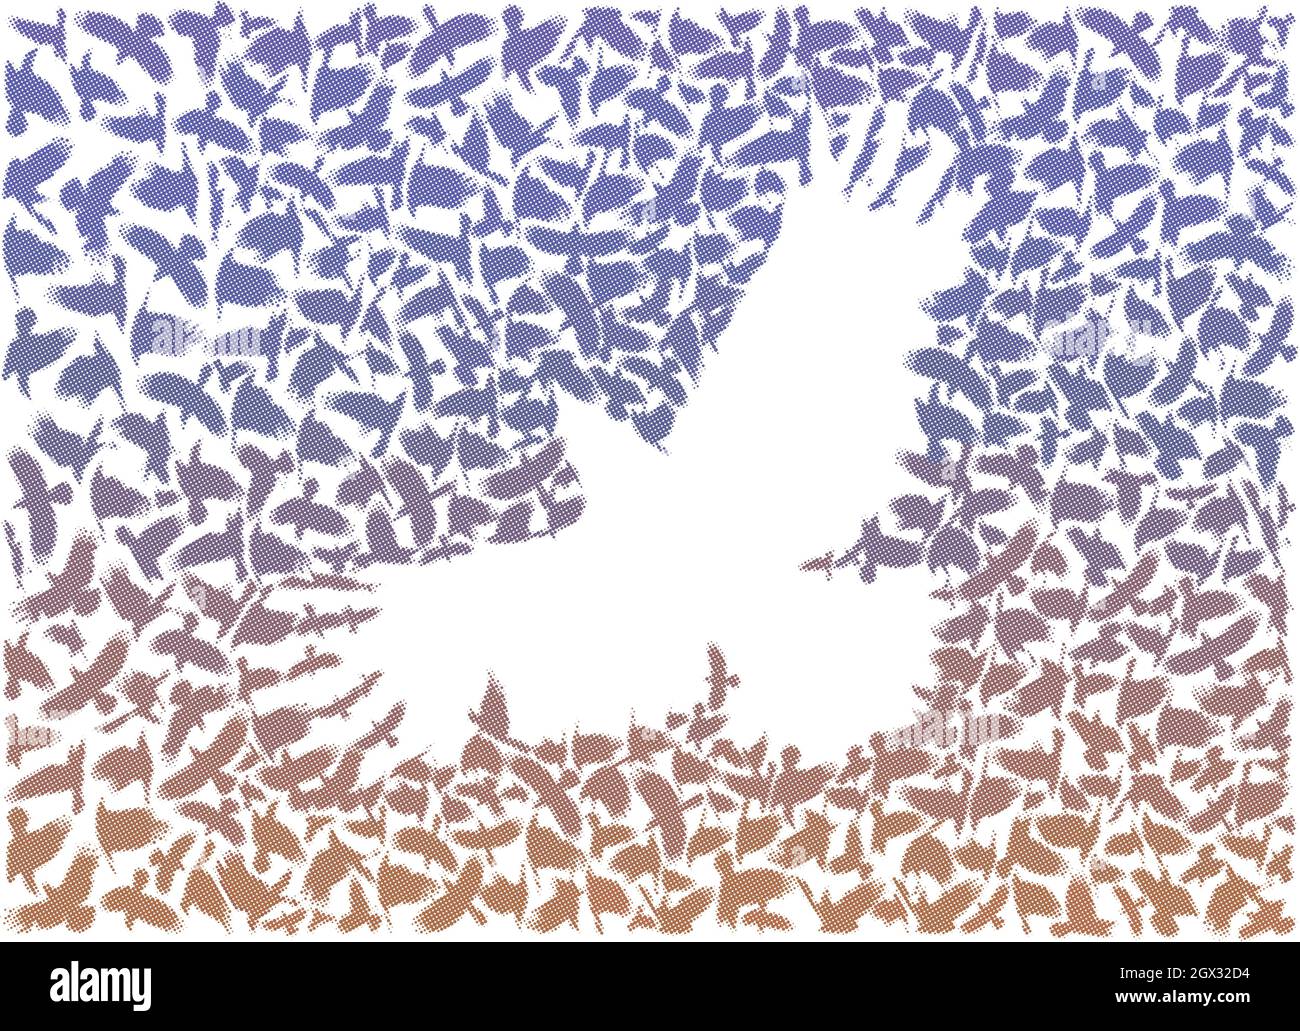 Raven from a Flock of flying ravens Stock Vector